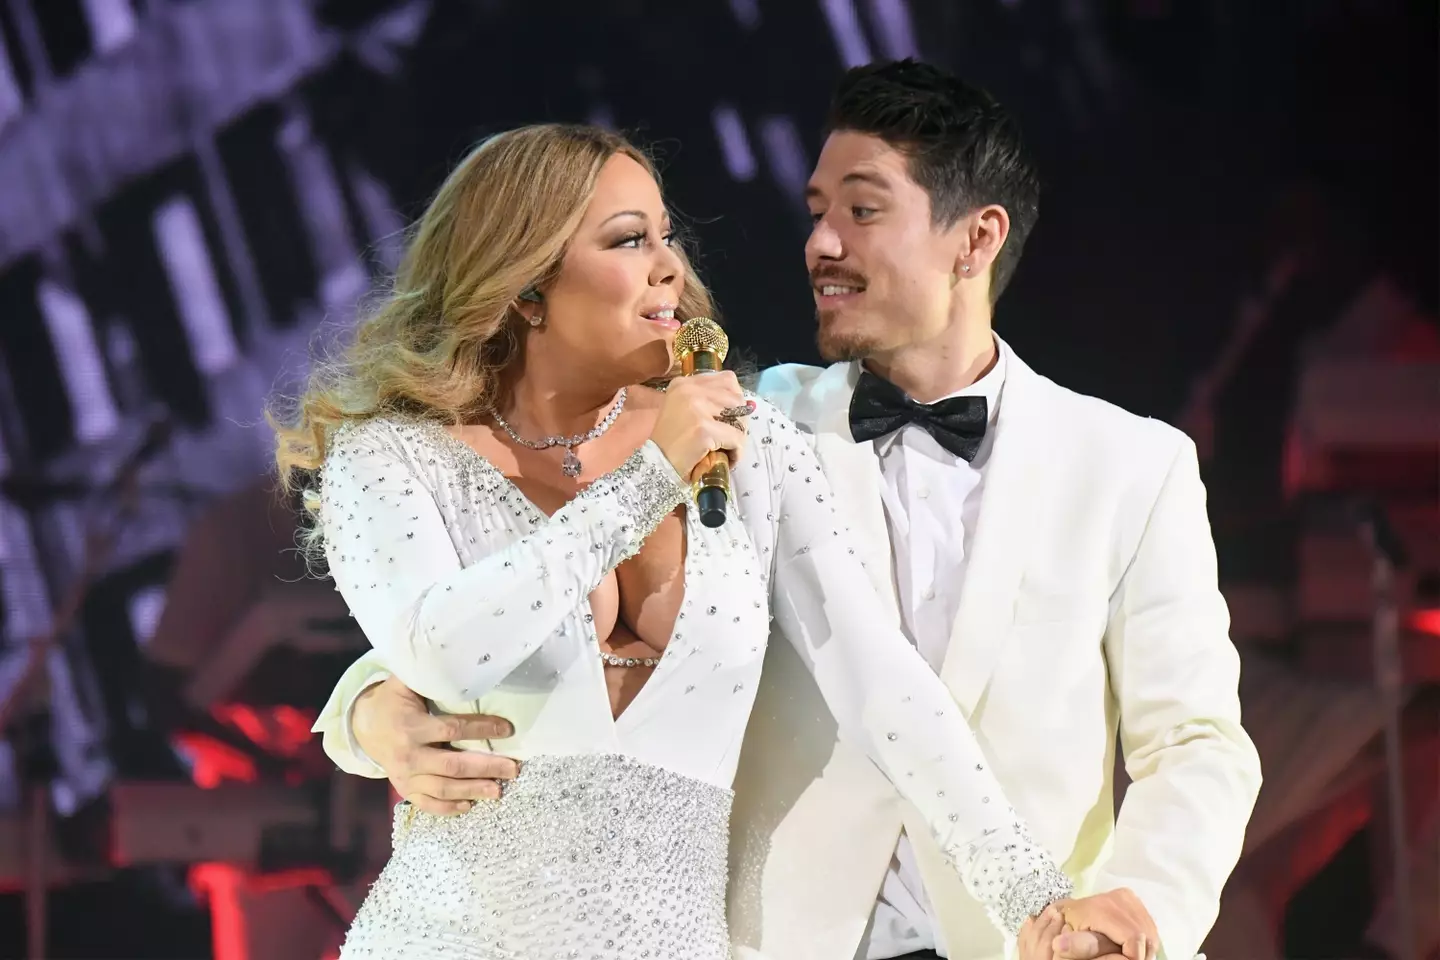 Mariah Carey's hit has made her the Queen of Christmas.